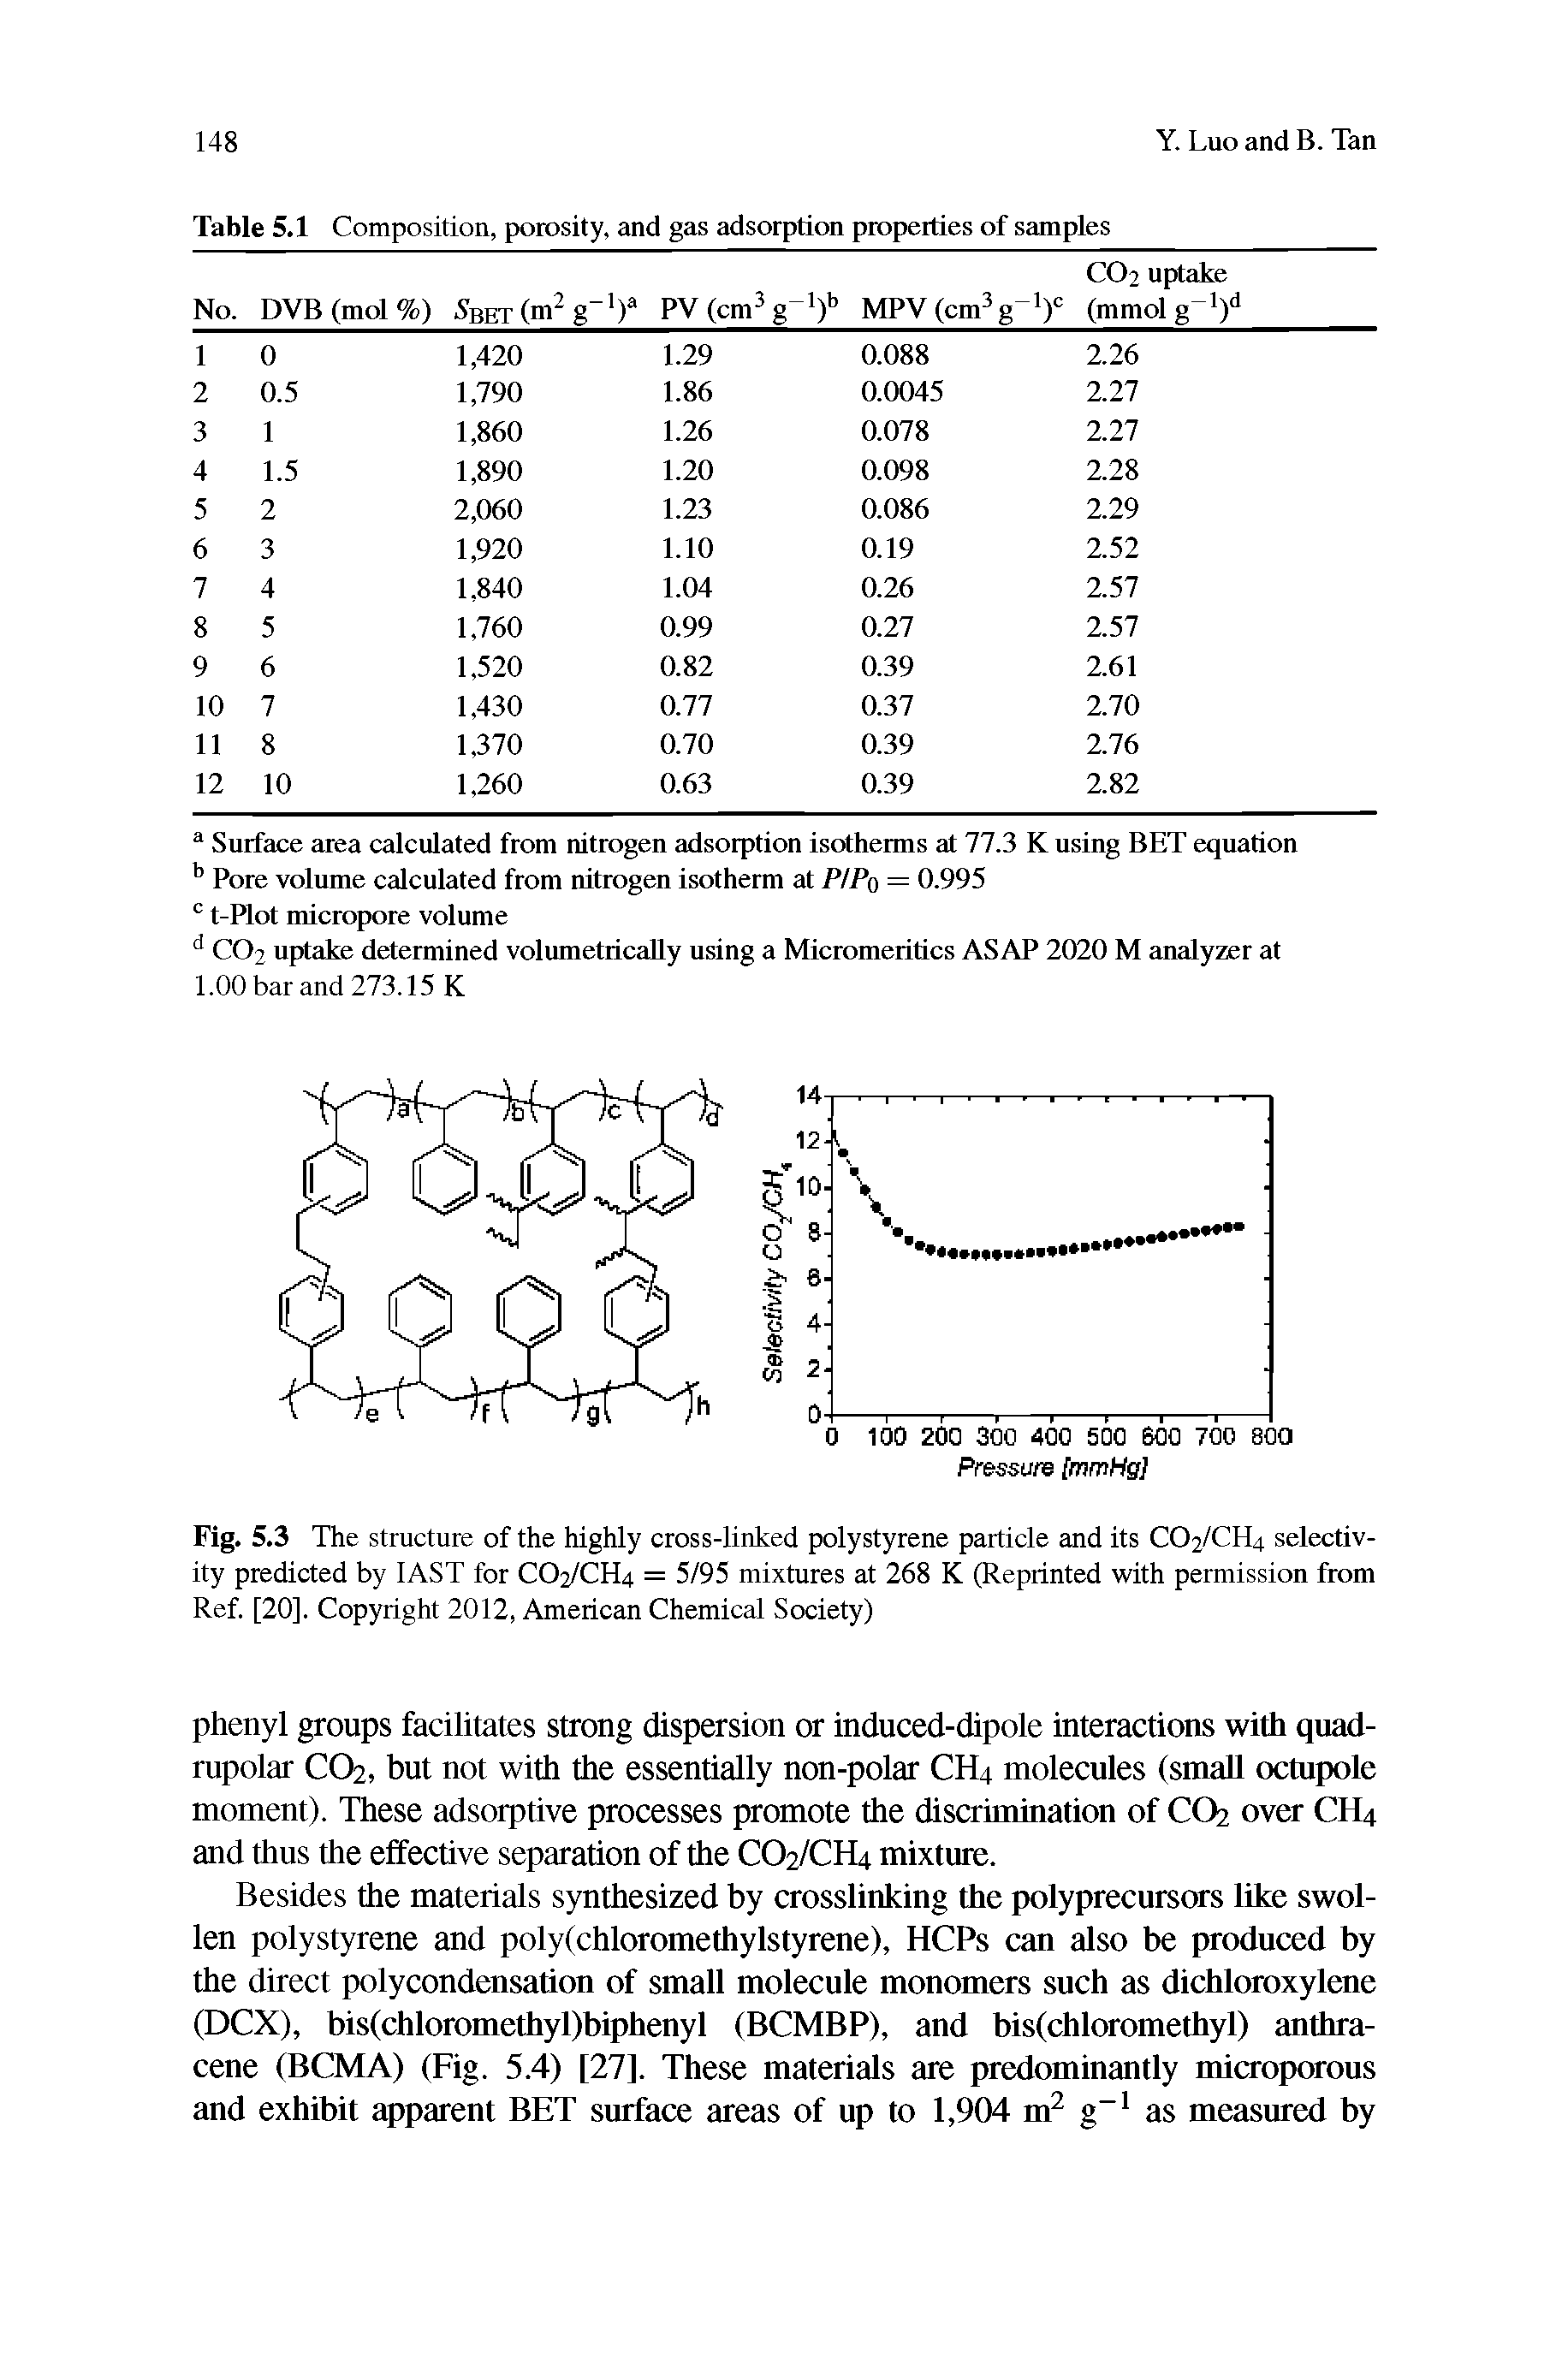 Fig. 5.3 The structure of the highly cross-linked polystyrene particle and its CO2/CH4 selectivity predicted by lAST for CO2/CH4 = 5/95 mixtures at 268 K (Reprinted with permission from Ref. [20]. Copyright 2012, American Chemical Society)...